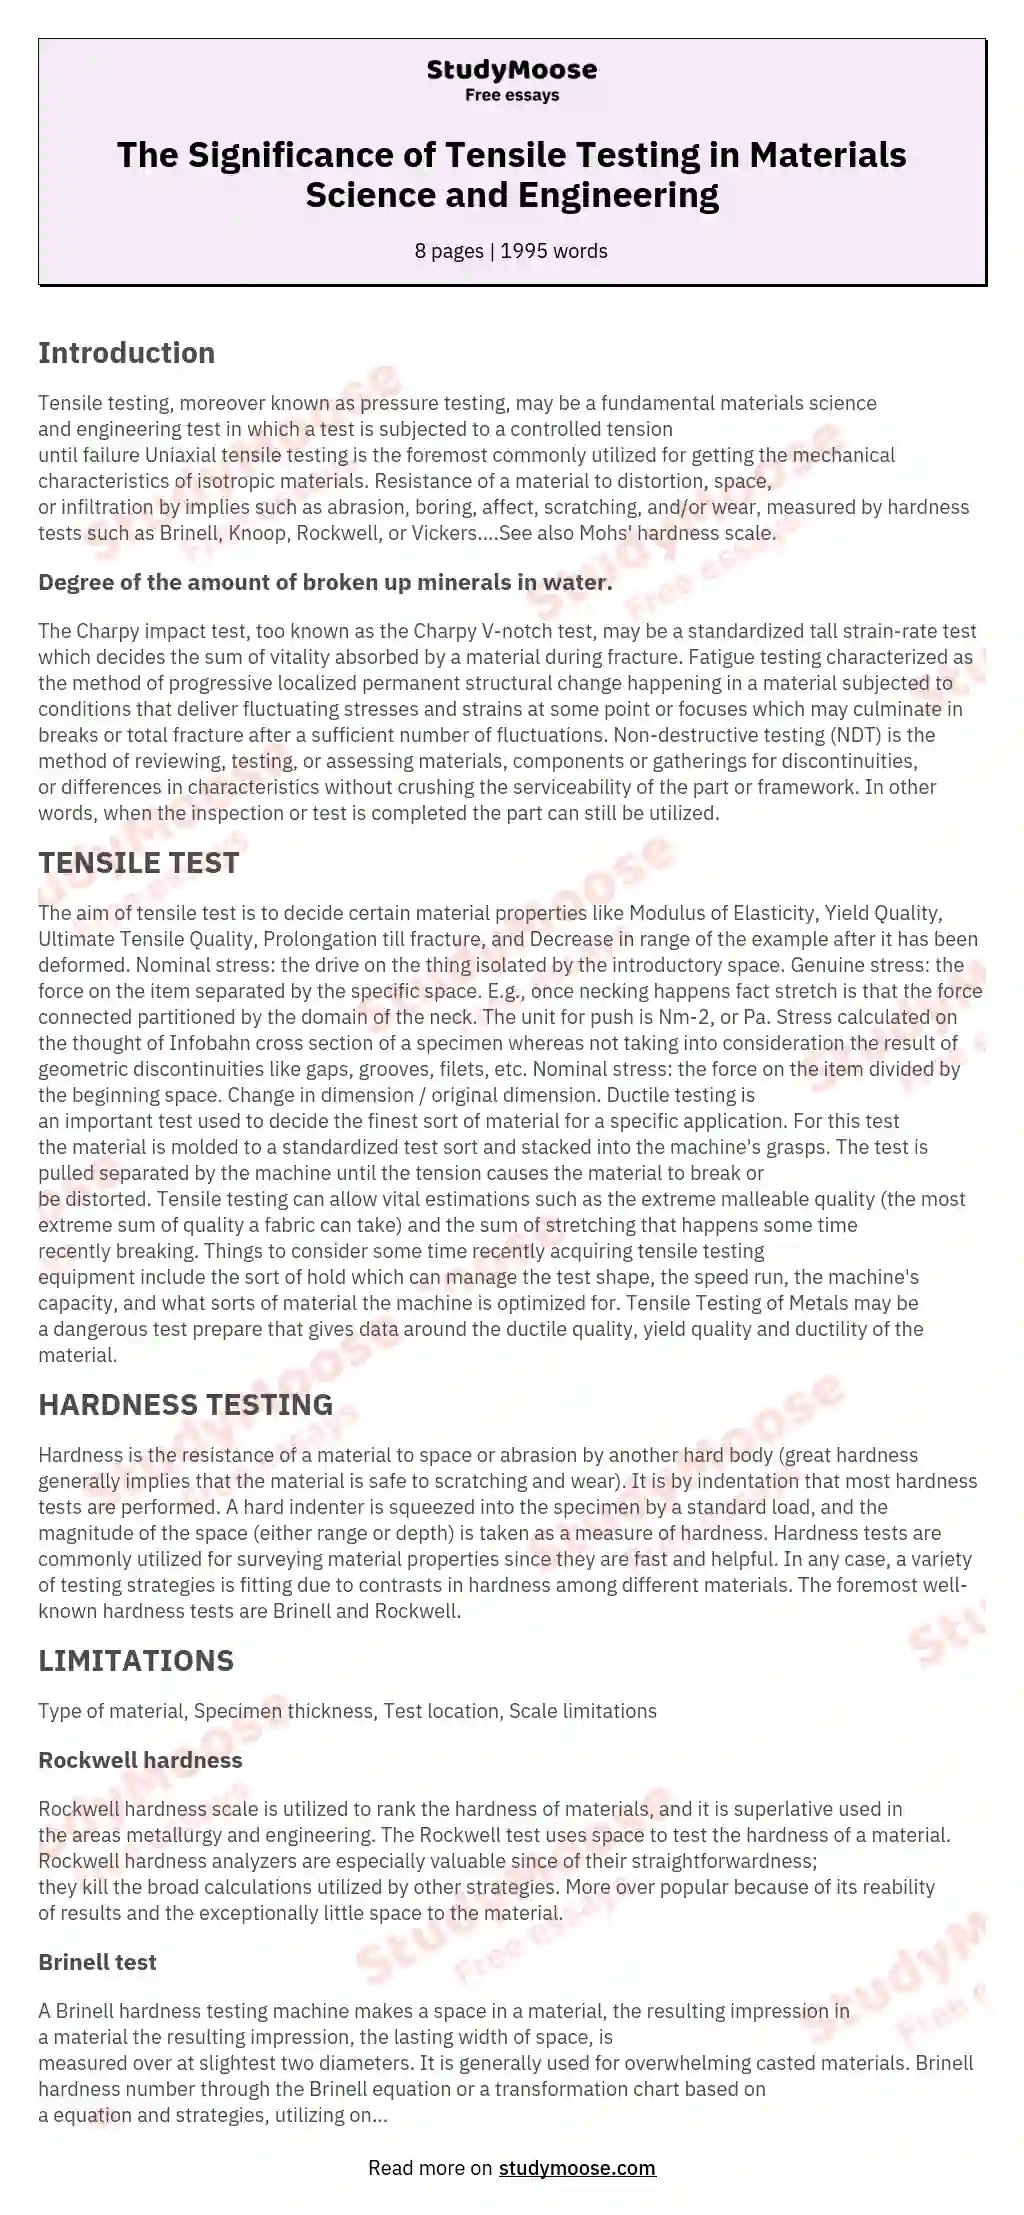 The Significance of Tensile Testing in Materials Science and Engineering essay